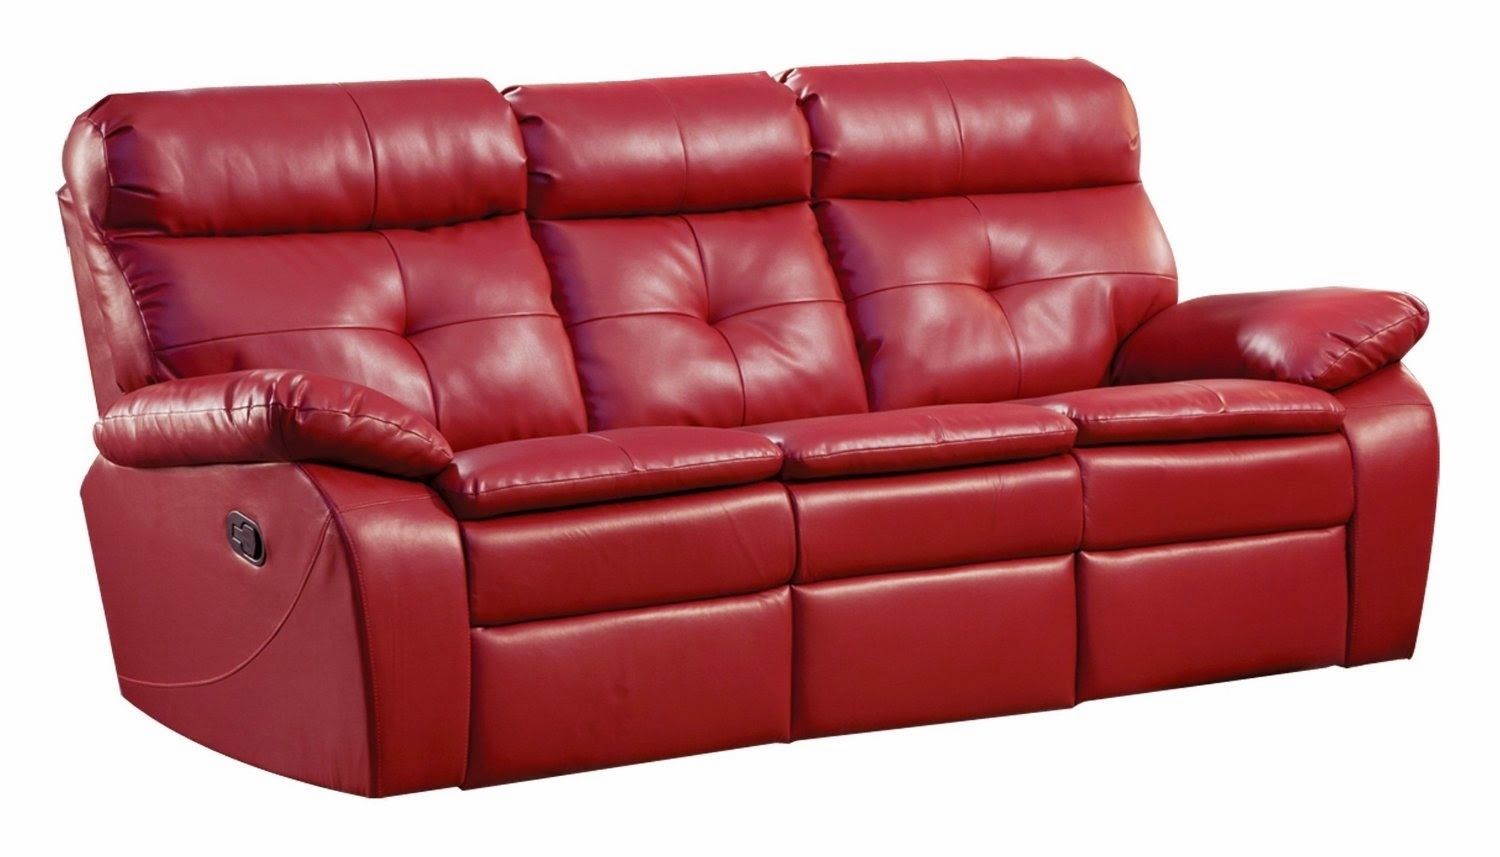 The Best Reclining Sofa Reviews: Red Leather Reclining Sofa And Loveseat Pertaining To Red Leather Reclining Sofas And Loveseats (View 8 of 15)